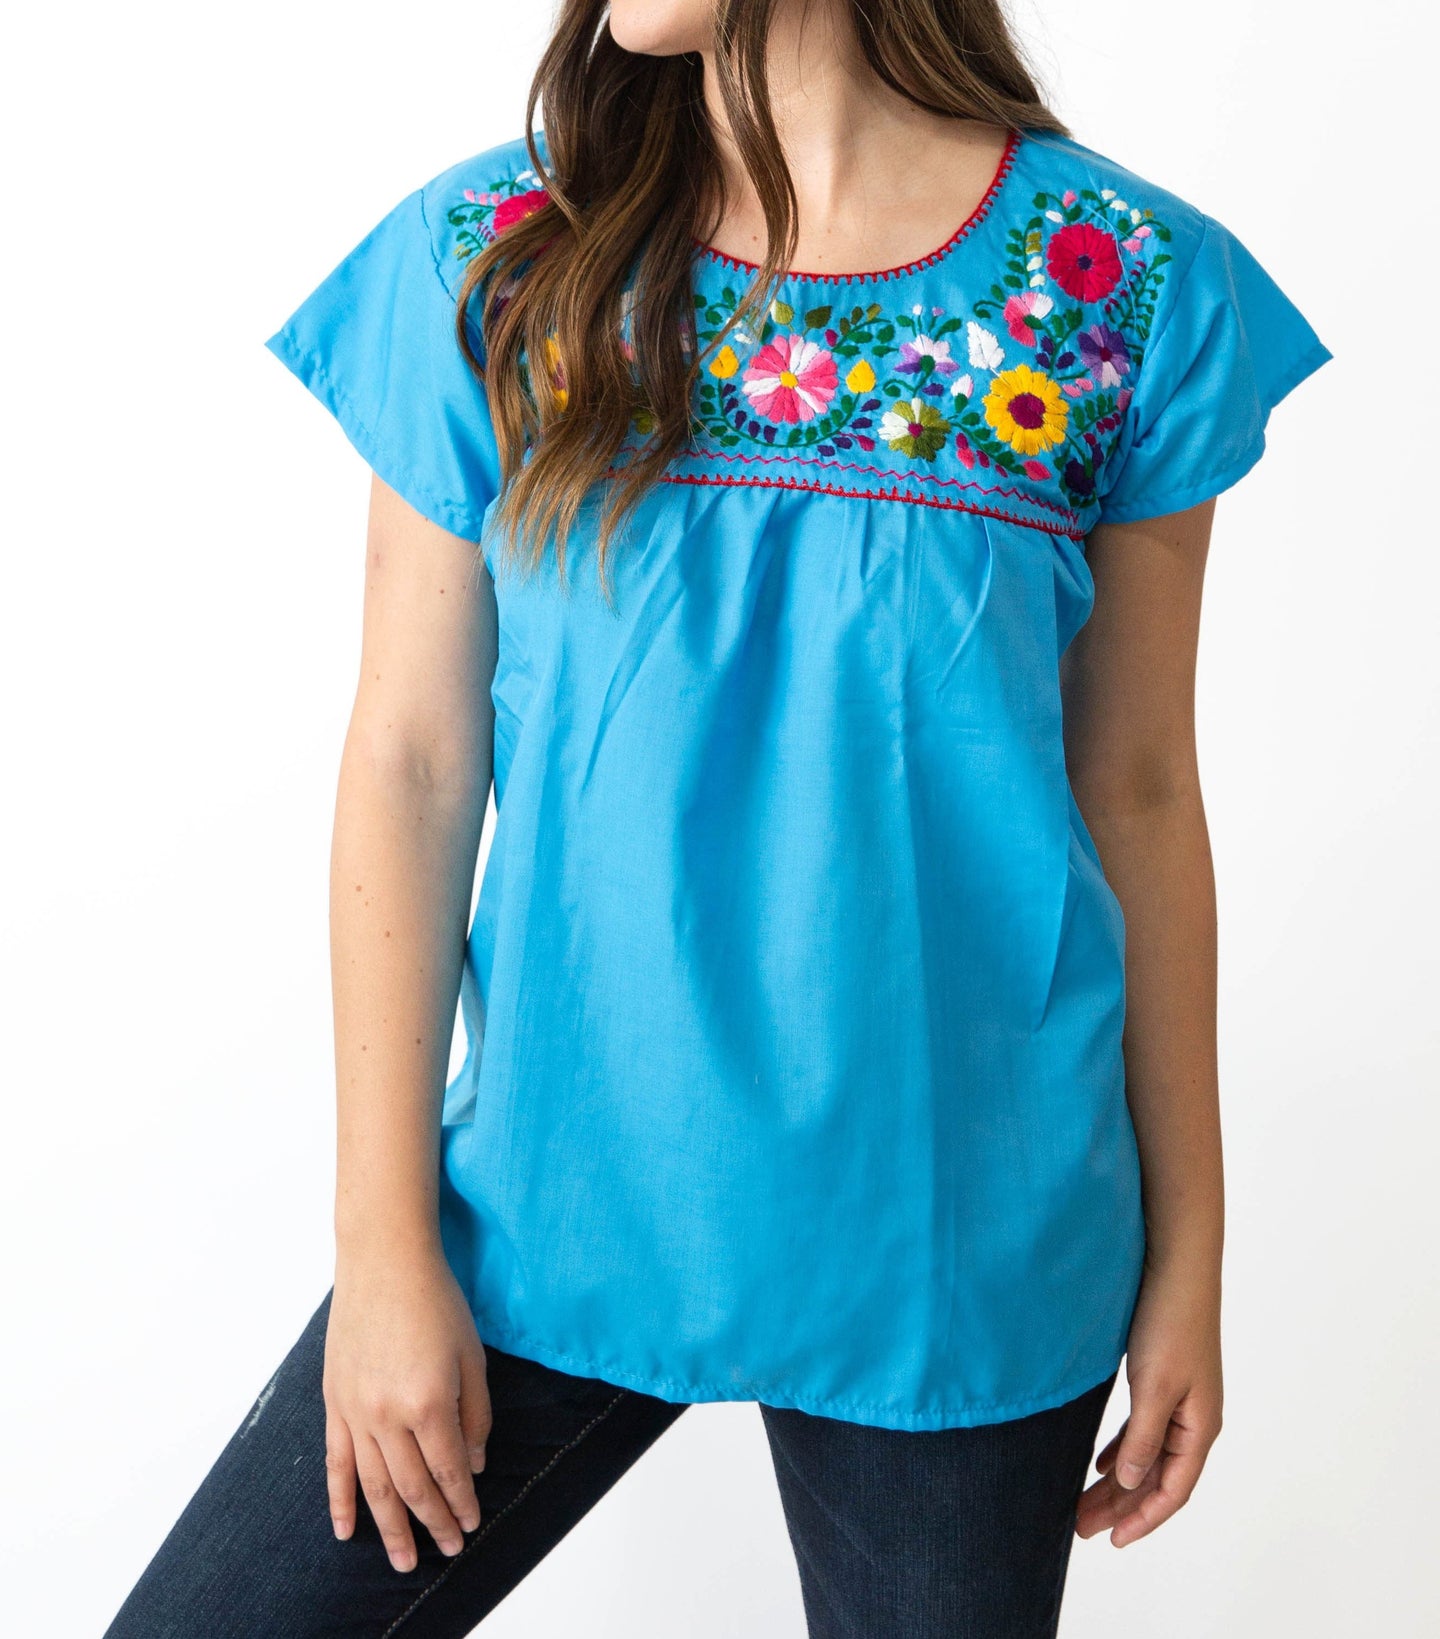 SIDREY Mexican Embroidered Pueblo Blouse - Turquoise